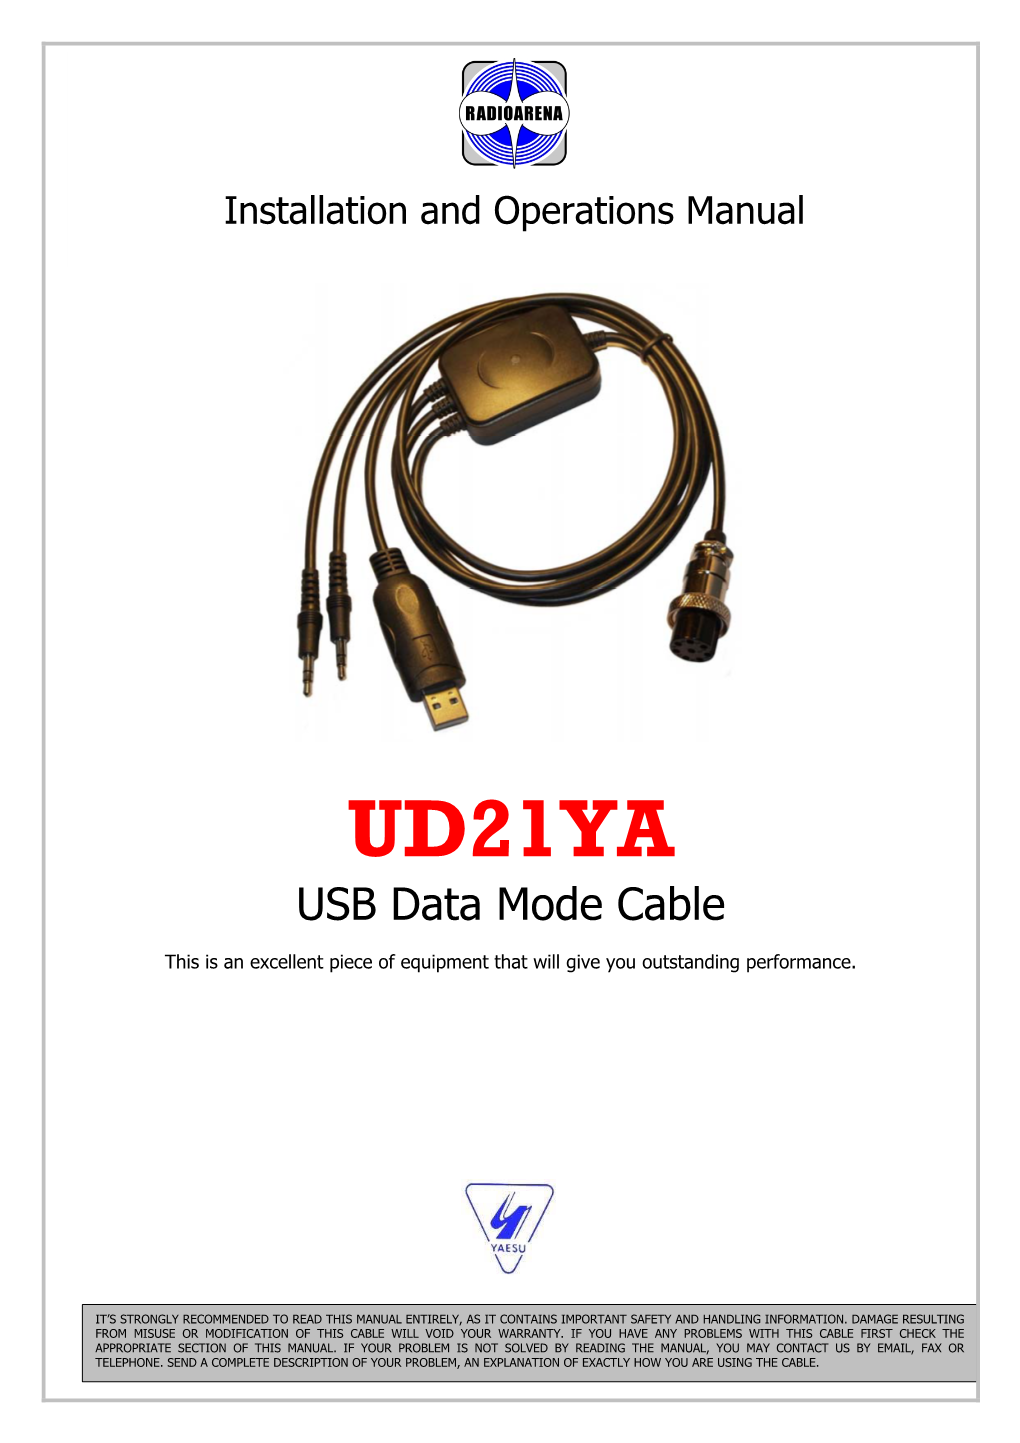 UD21YA USB Data Mode Cable Designed for Yaesu Transceivers